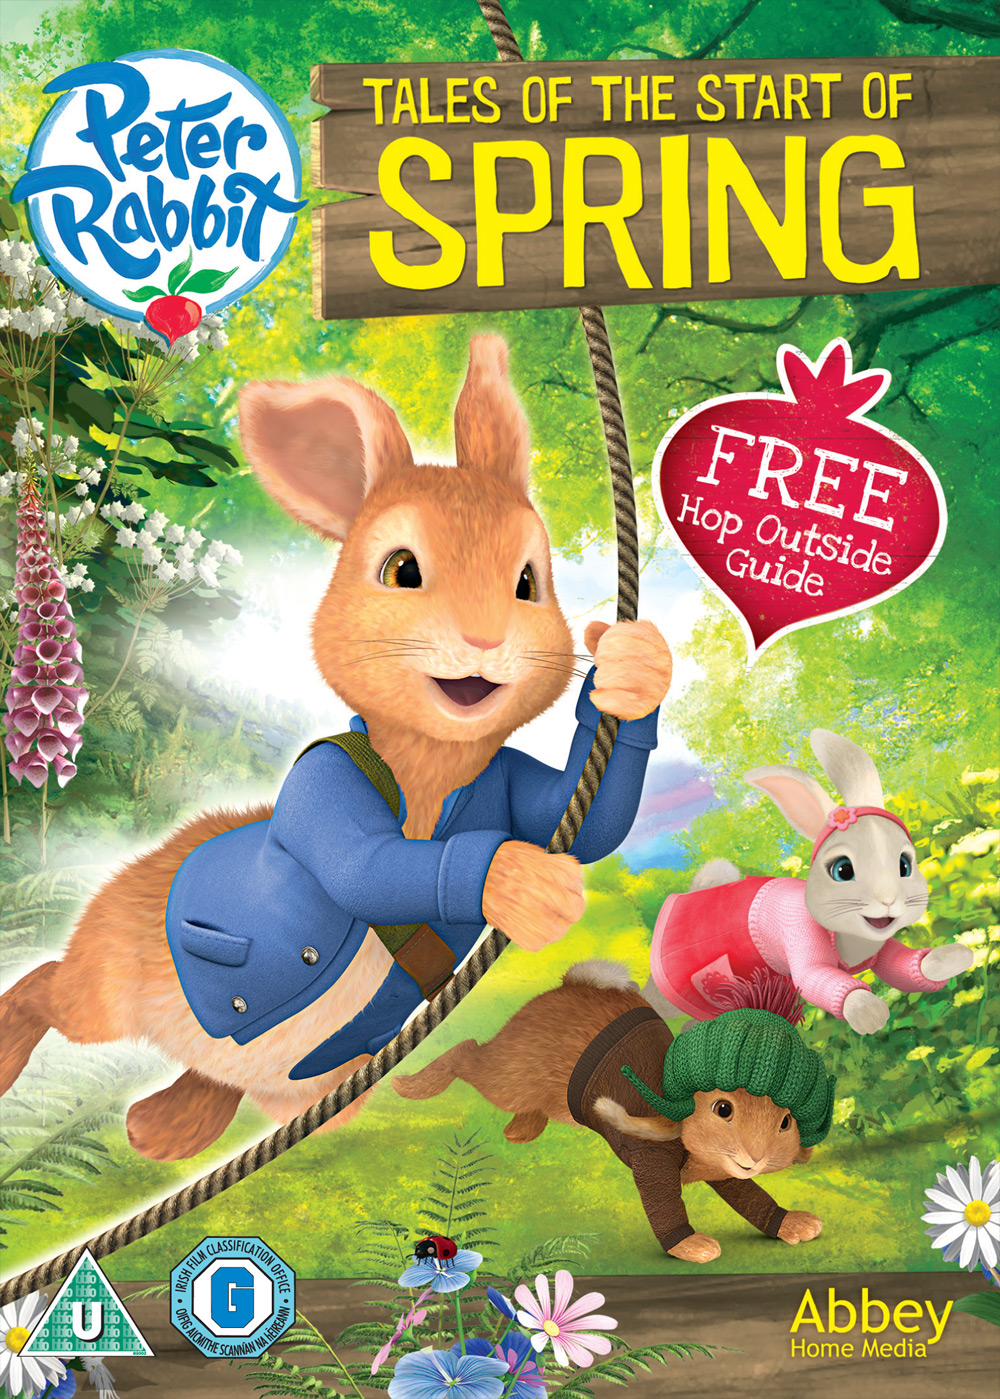 Peter Rabbit - Tales of the Start of Spring on DVD Review and Giveaway